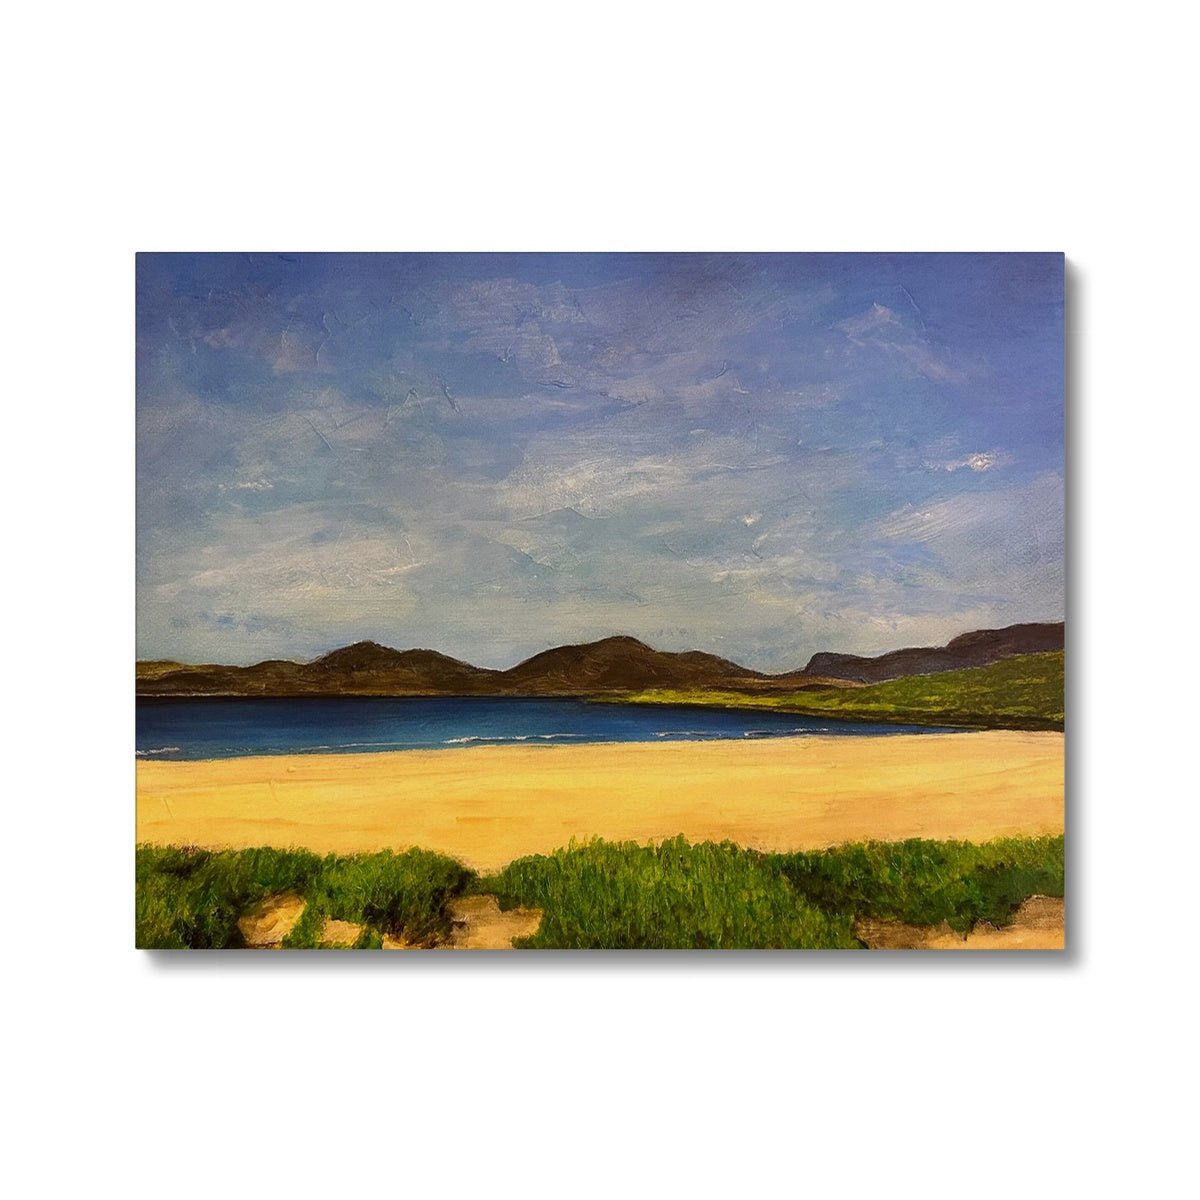 Luskentyre Beach Harris Painting | Canvas From Scotland-Contemporary Stretched Canvas Prints-Hebridean Islands Art Gallery-24"x18"-Paintings, Prints, Homeware, Art Gifts From Scotland By Scottish Artist Kevin Hunter